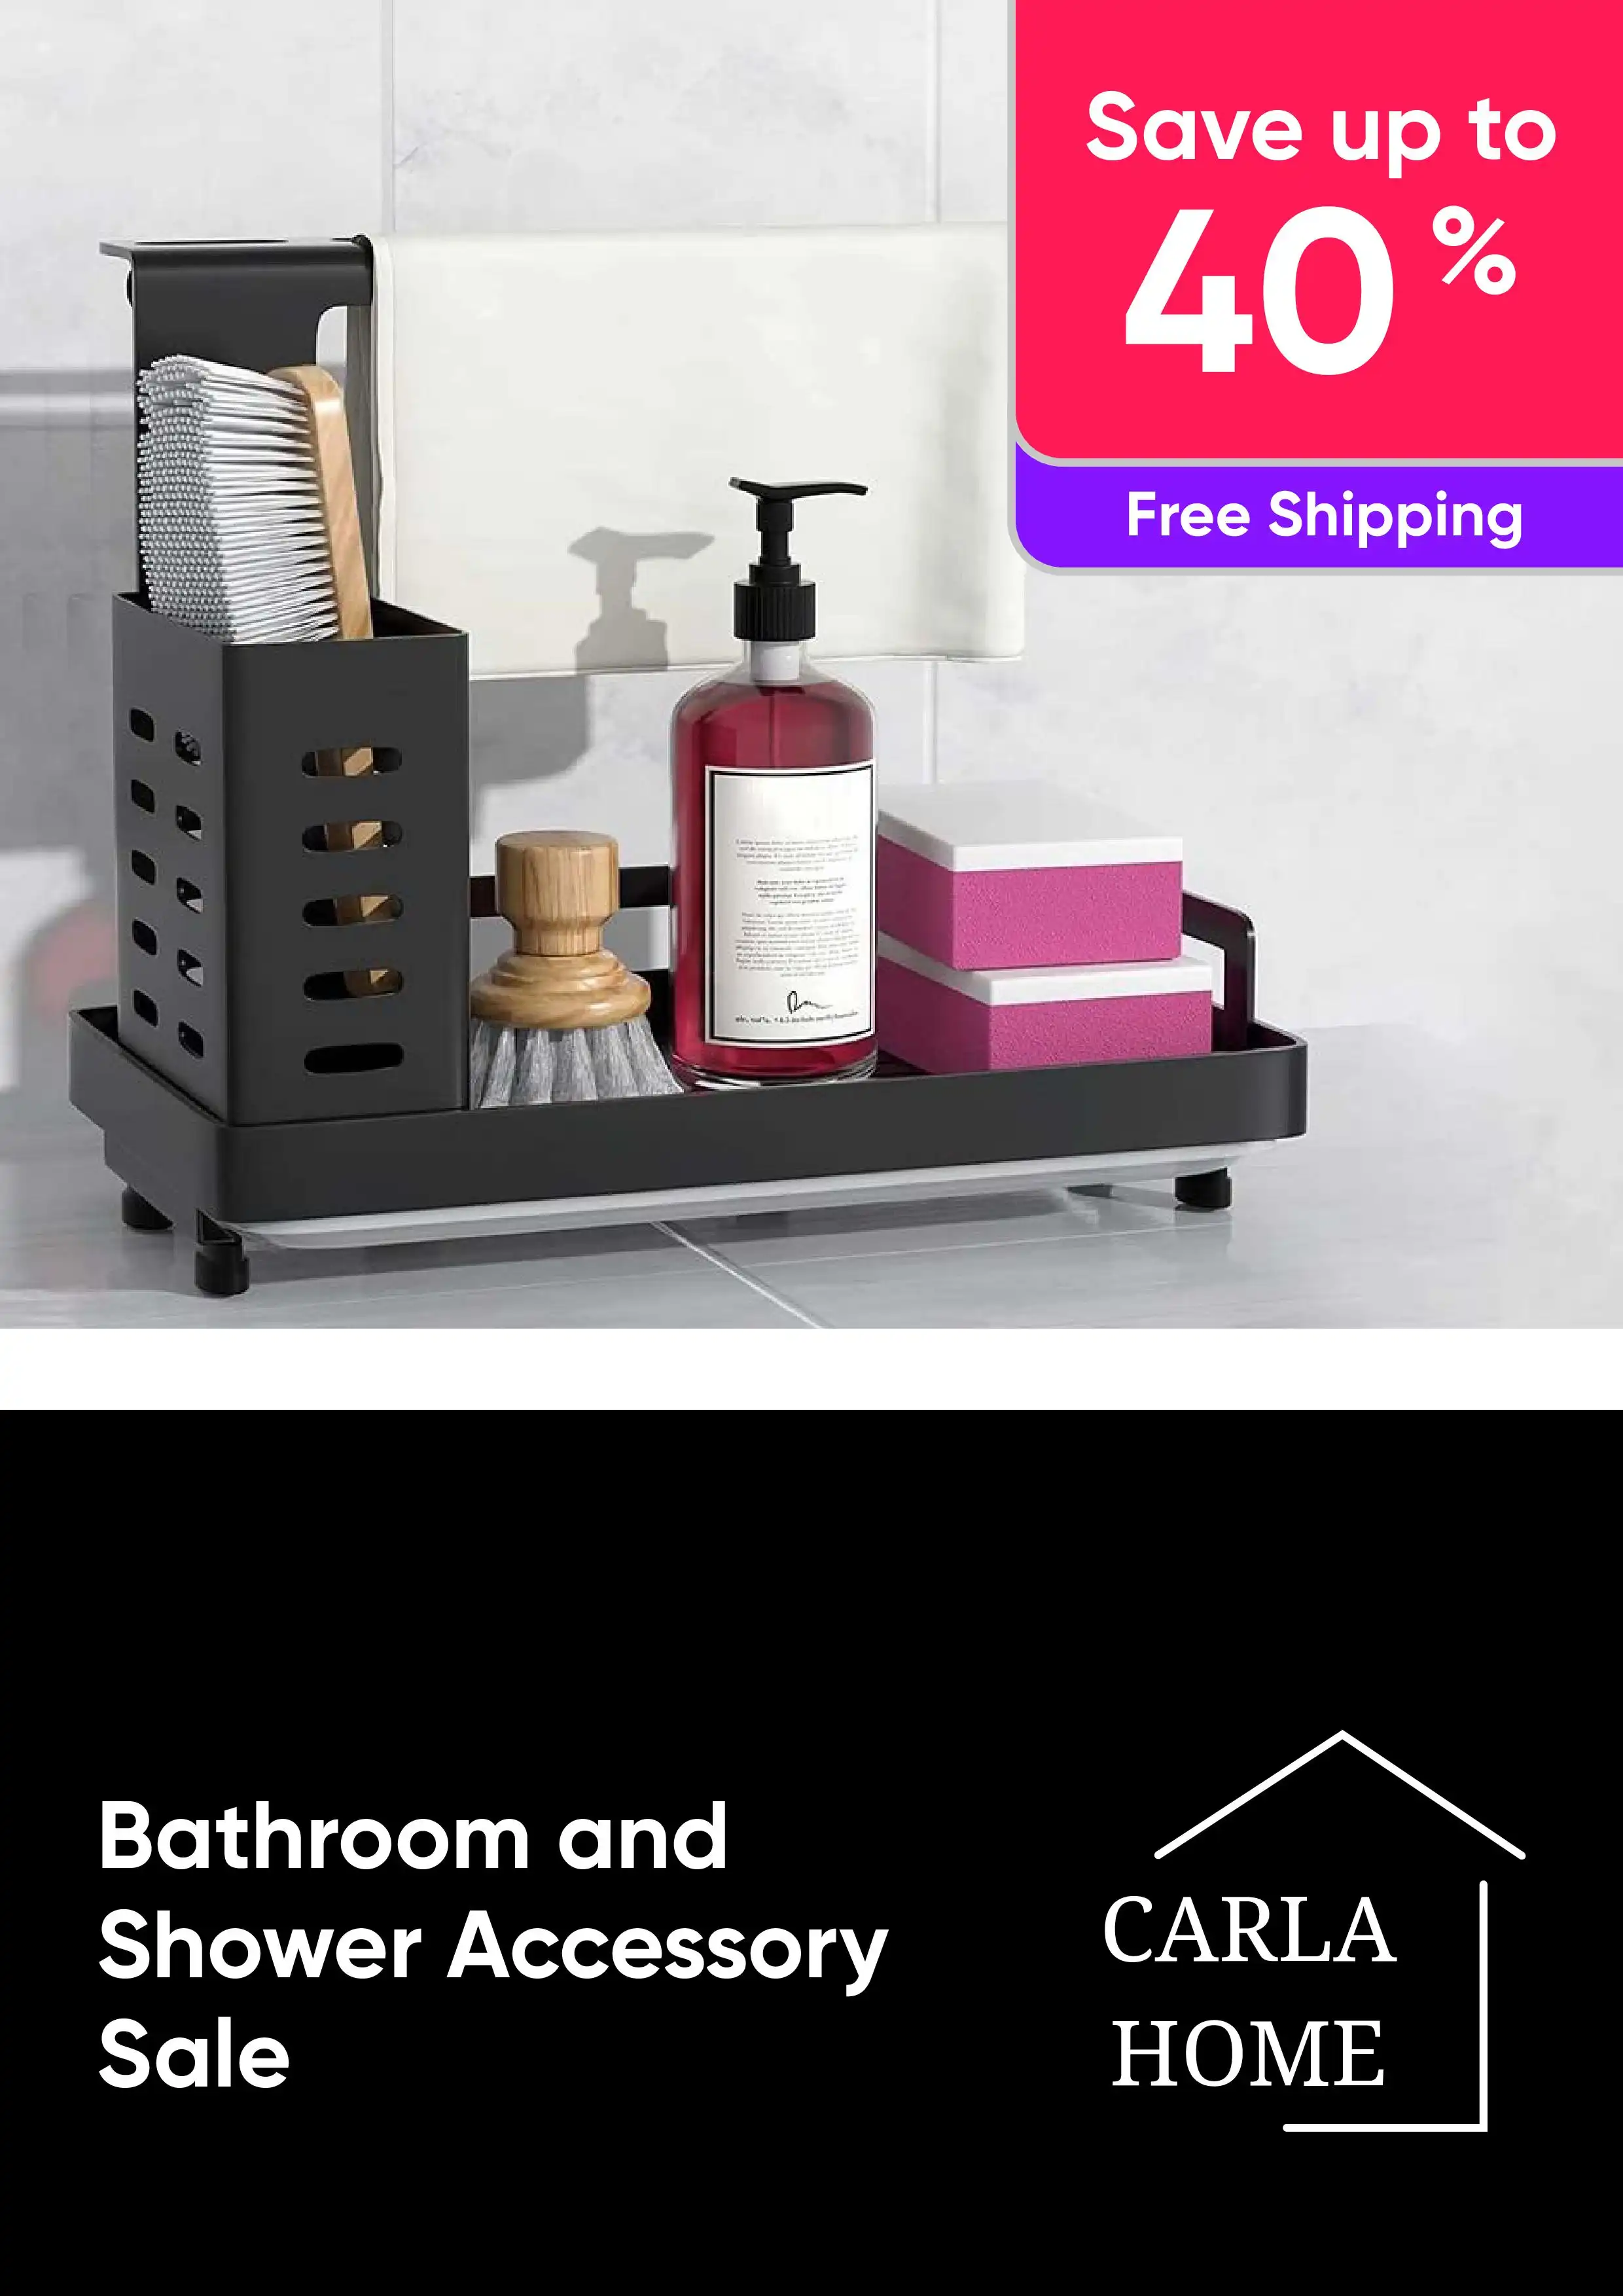 Save Up to 40% Off A Range of Bathroom and Shower Accessories